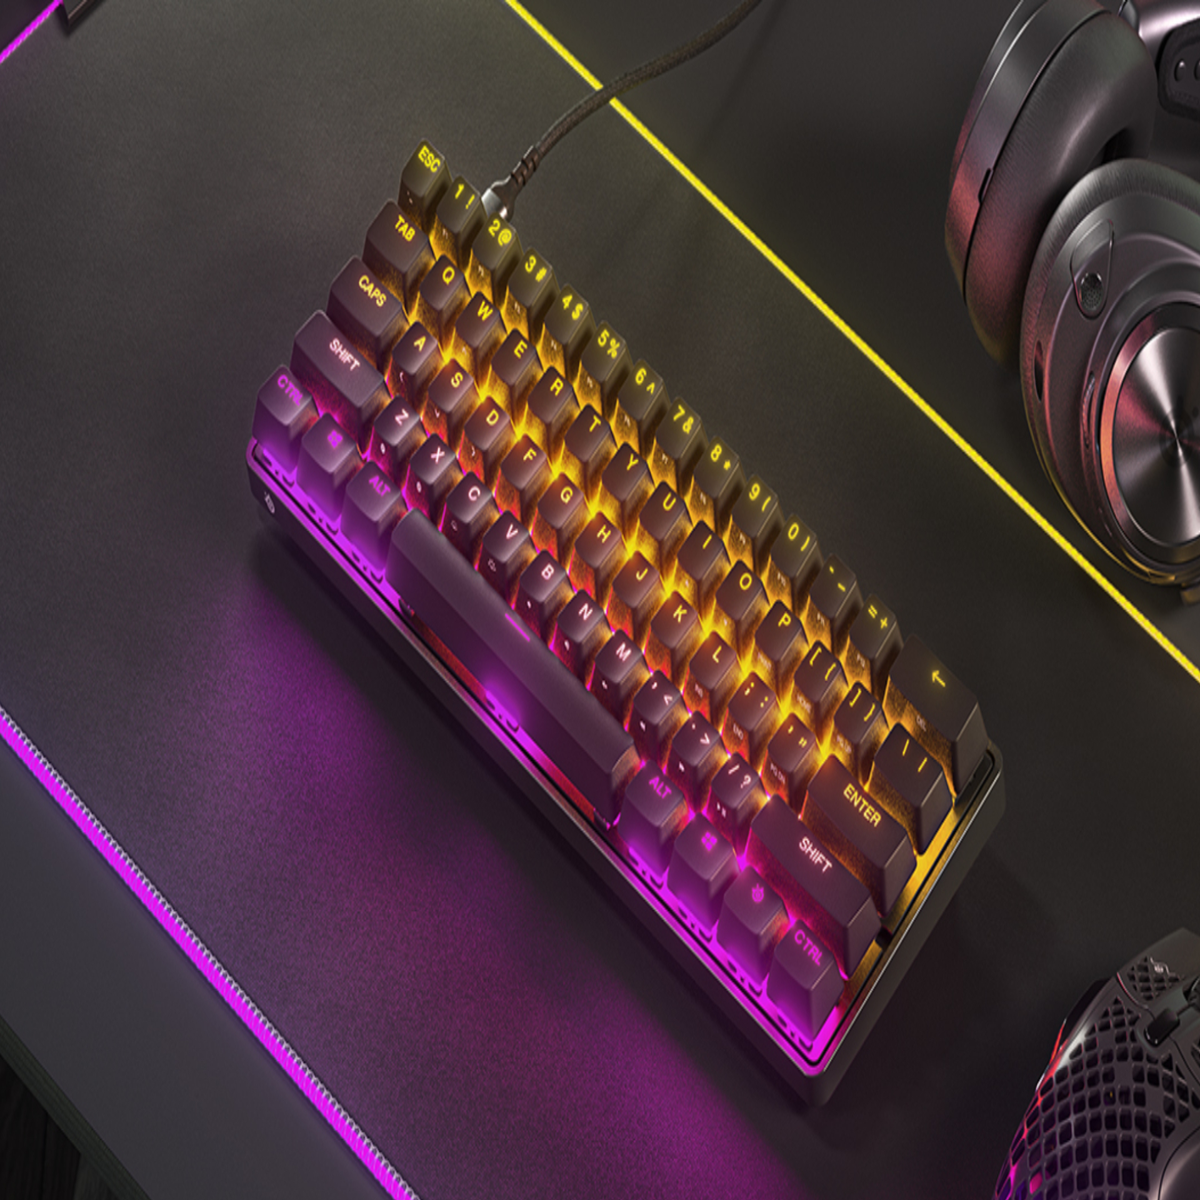 SteelSeries Apex 9 Series Keyboards Launched